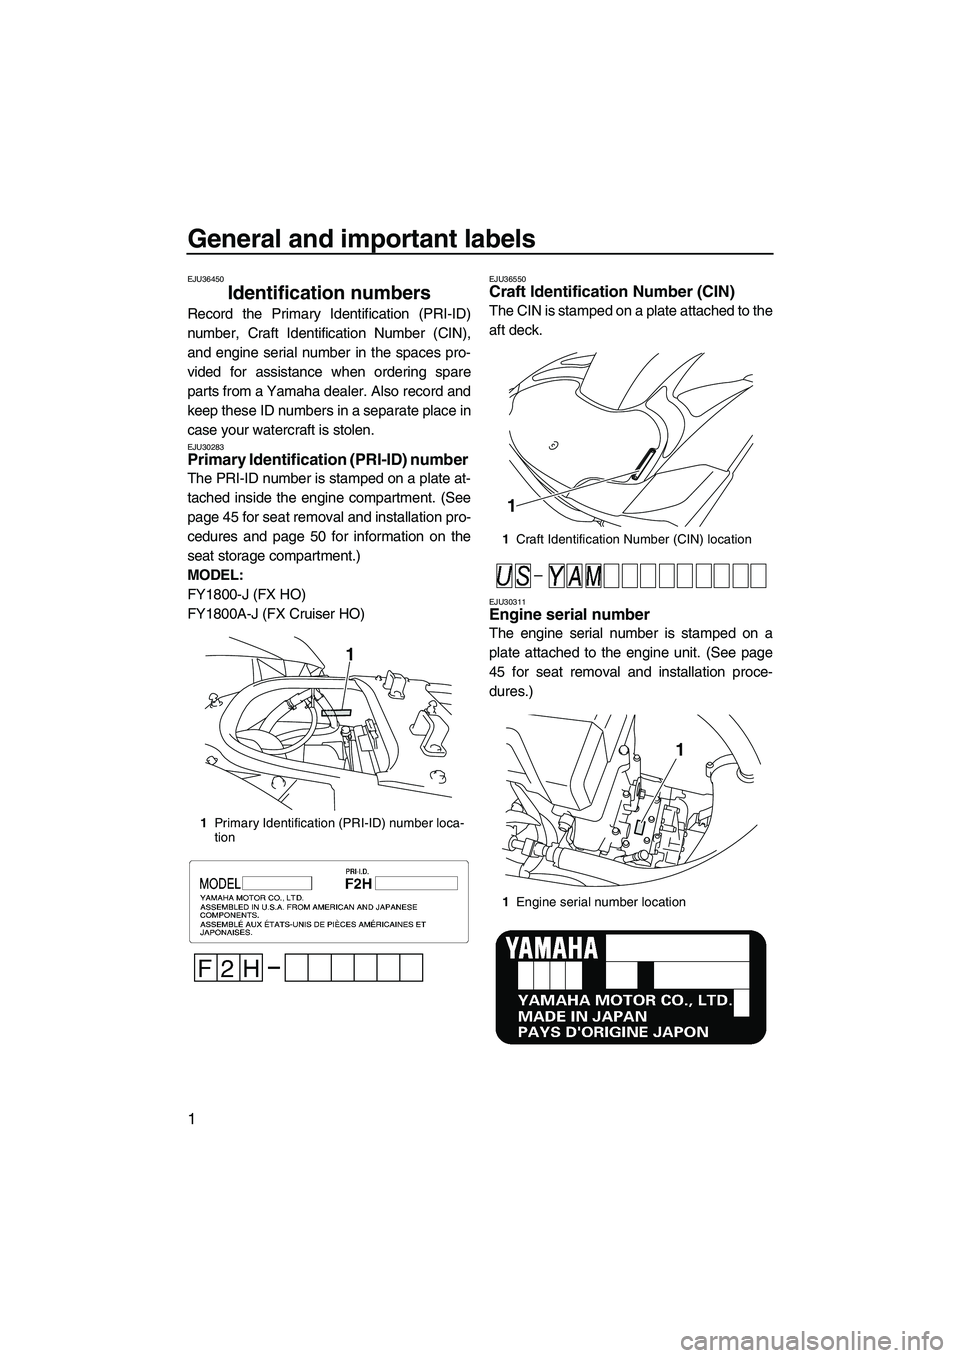 YAMAHA FX HO 2010  Owners Manual General and important labels
1
EJU36450
Identification numbers 
Record the Primary Identification (PRI-ID)
number, Craft Identification Number (CIN),
and engine serial number in the spaces pro-
vided 